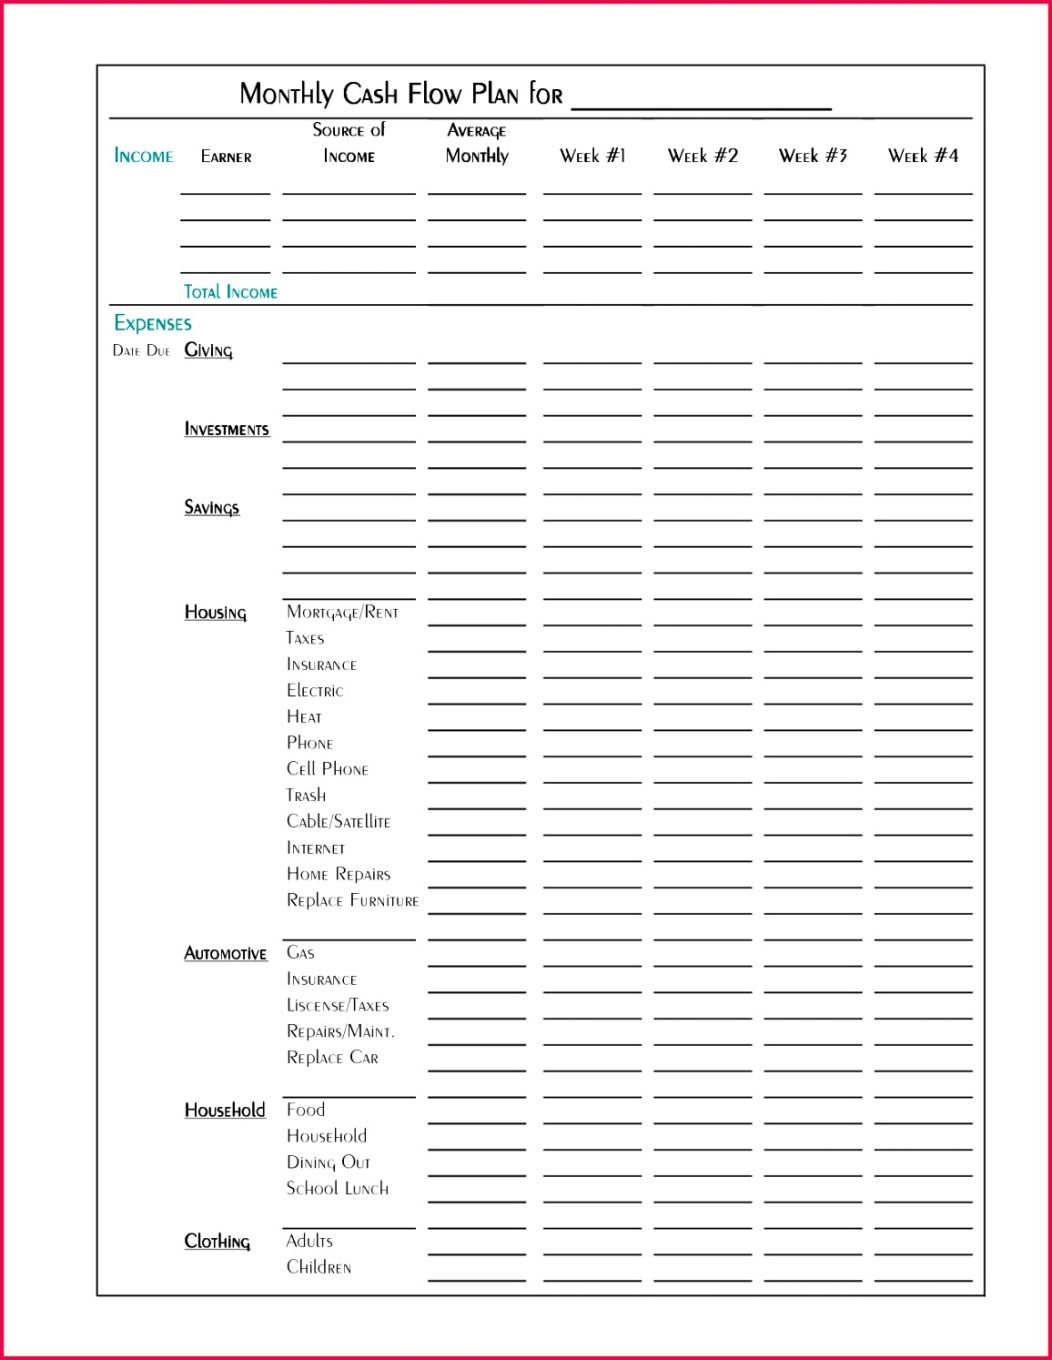 Costum Expense Form Template For Small Business Pdf Sample